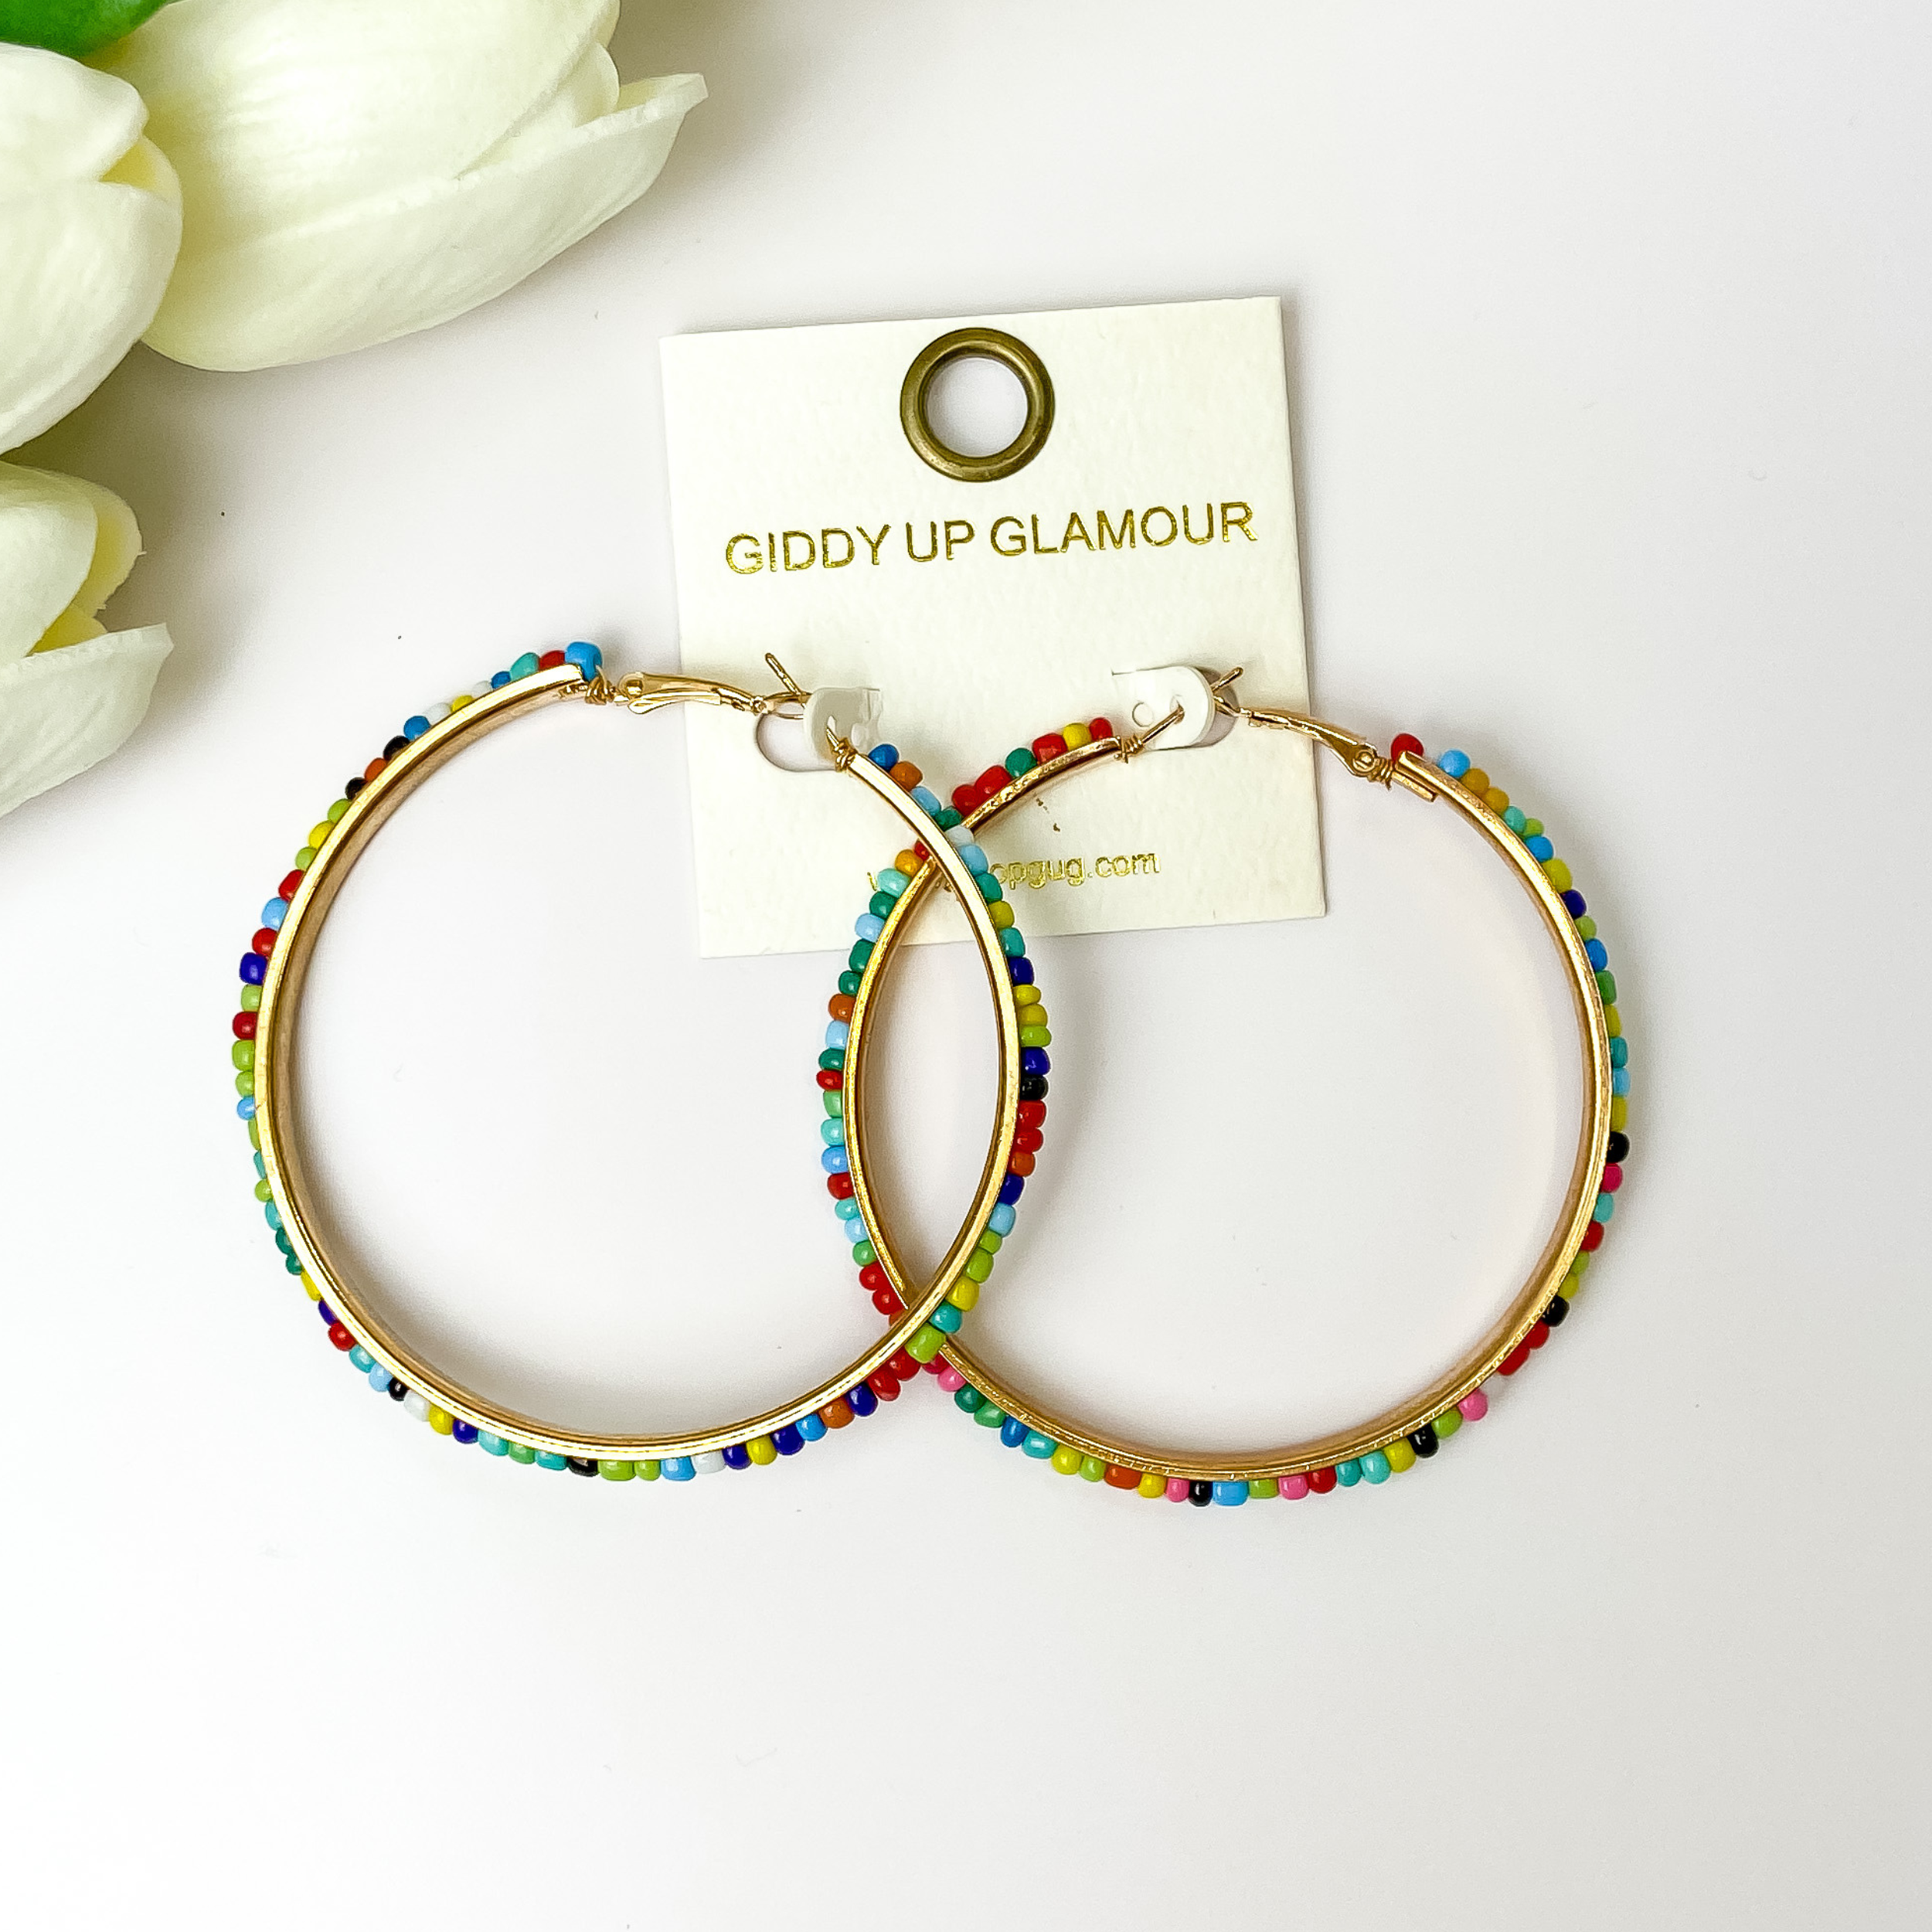 A pair of gold tone hoop earrings with multi color beads pictured on a white background with white flowers.